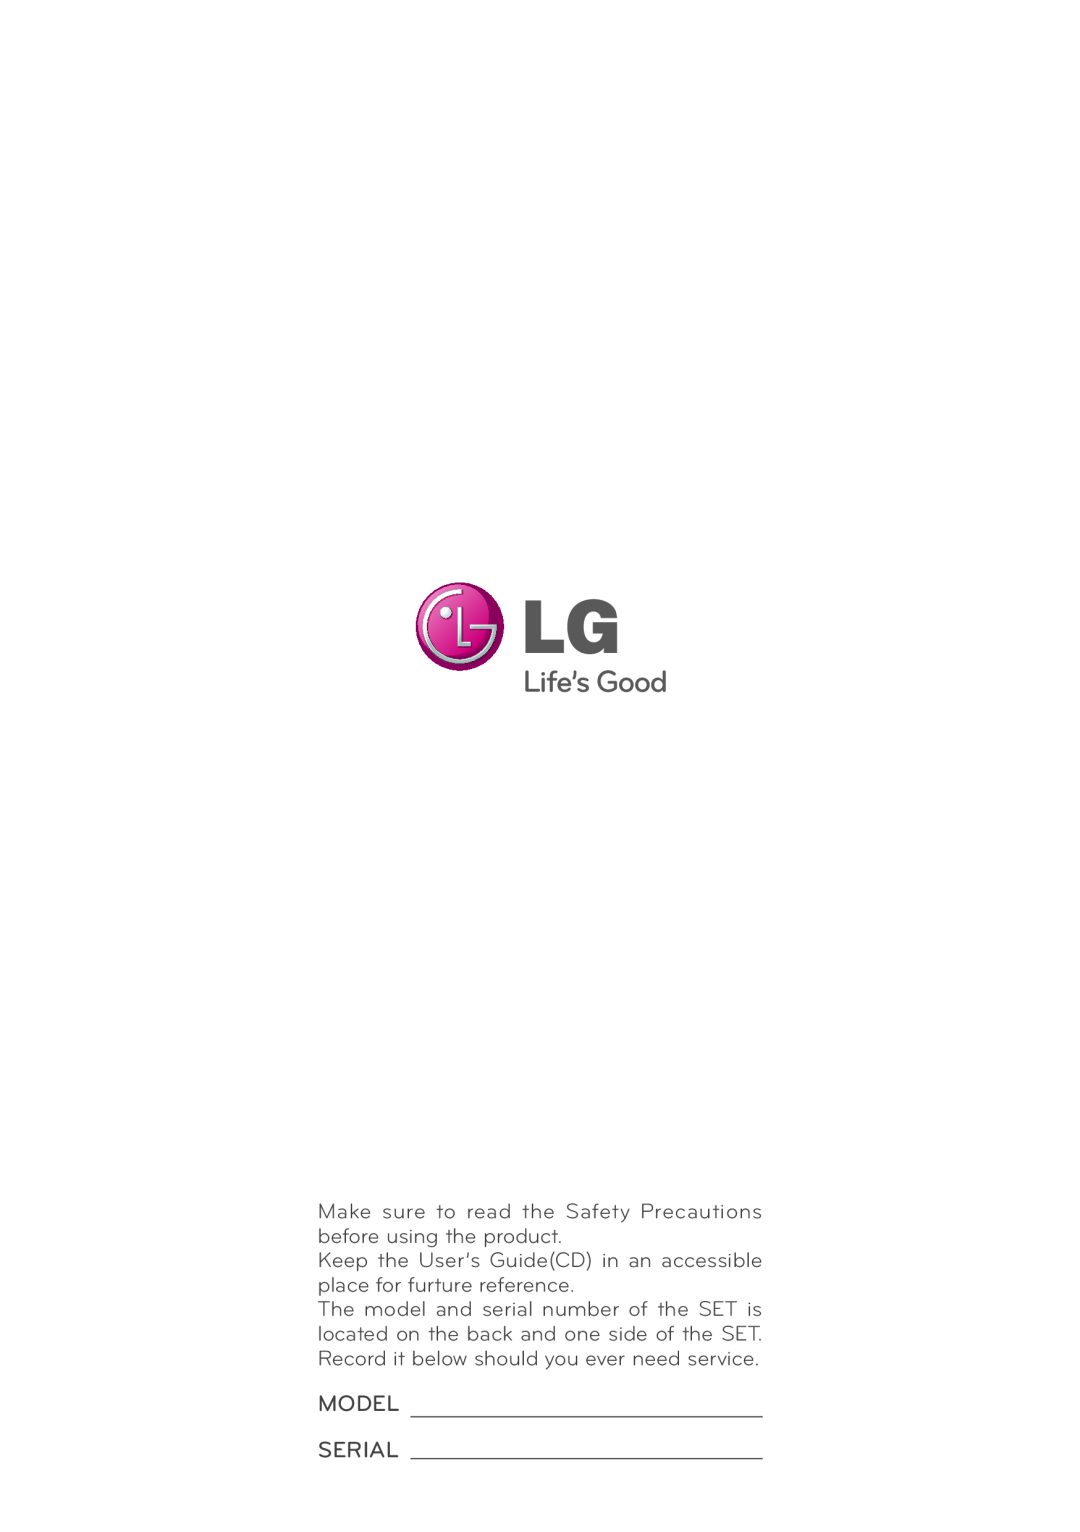 LG Electronics W2243S, W2043TE, W2043SE Model Serial, Make sure to read the Safety Precautions before using the product 